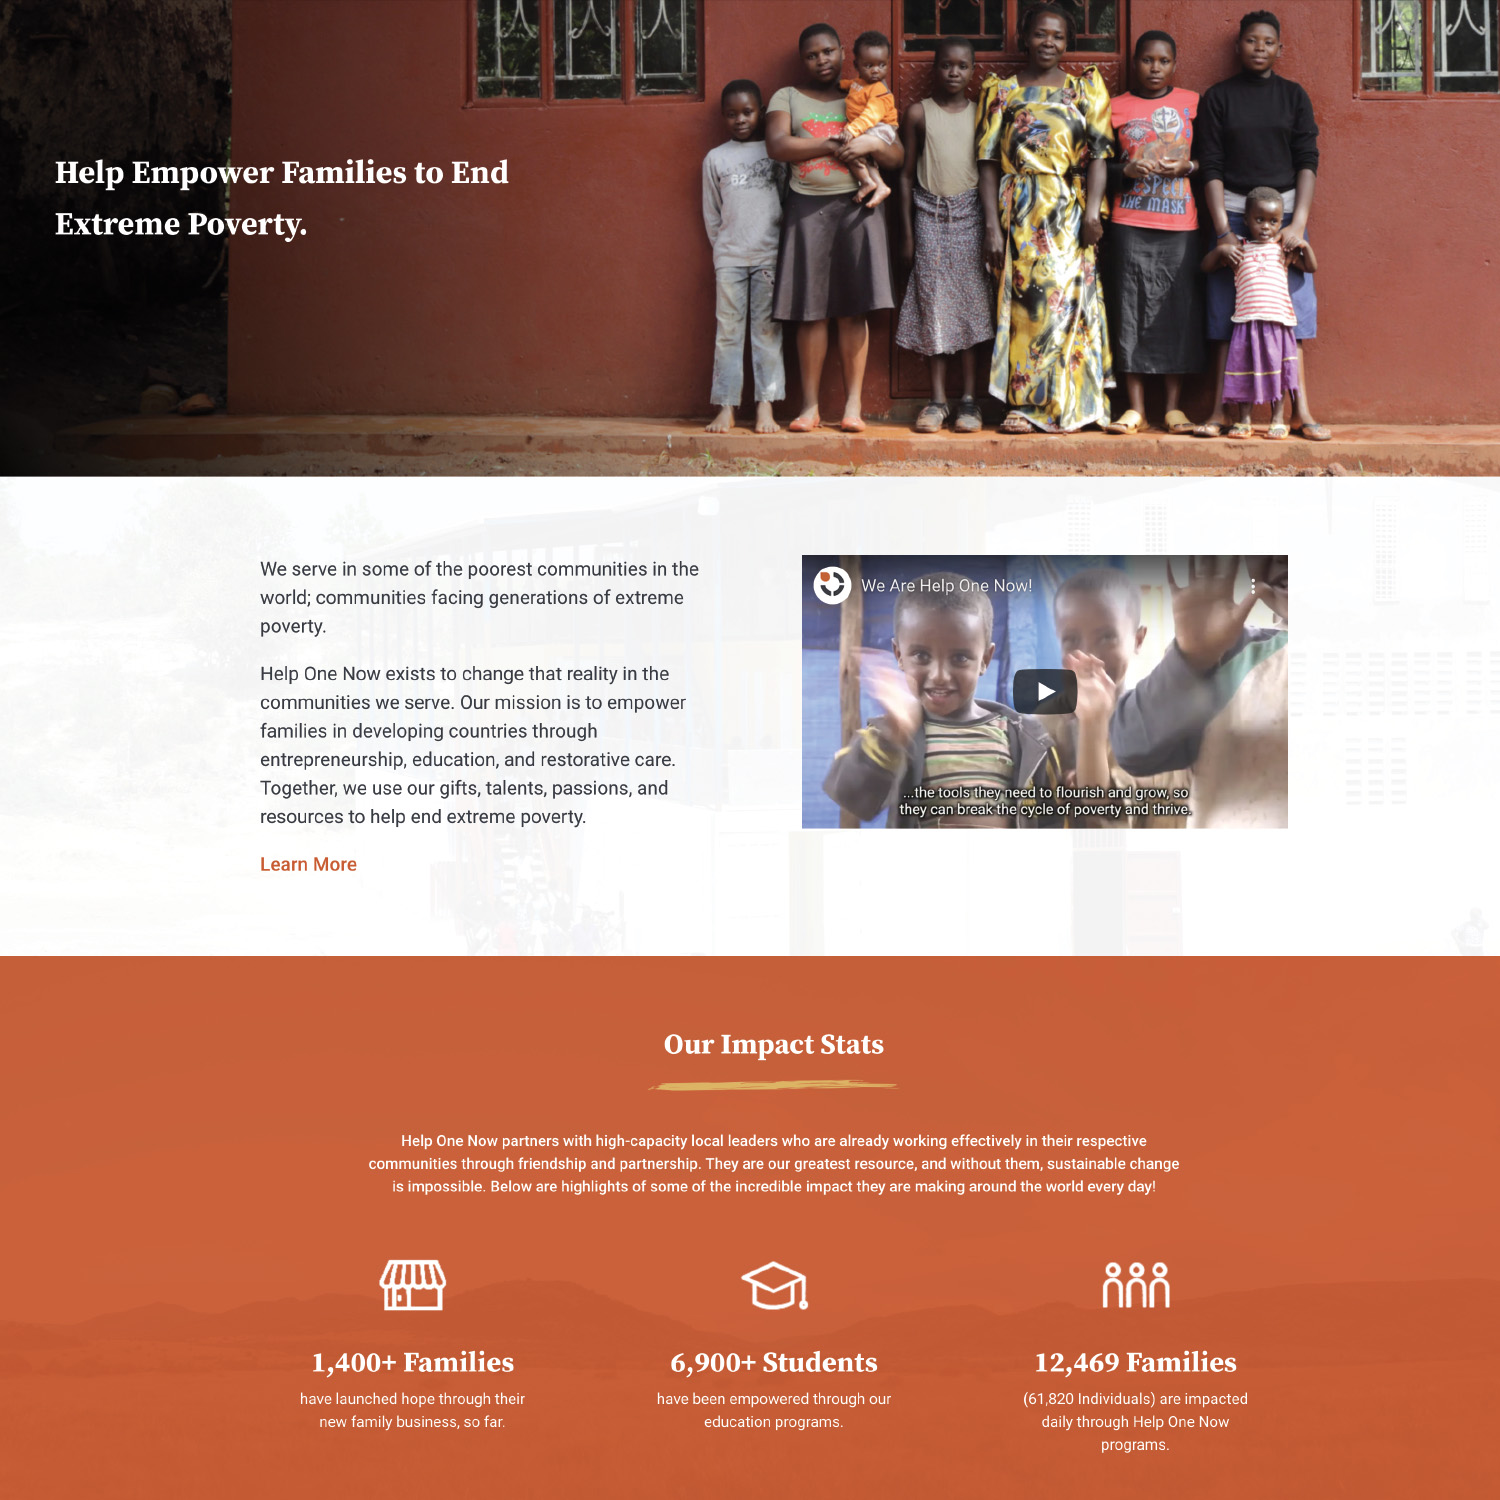 The Help One Now Website